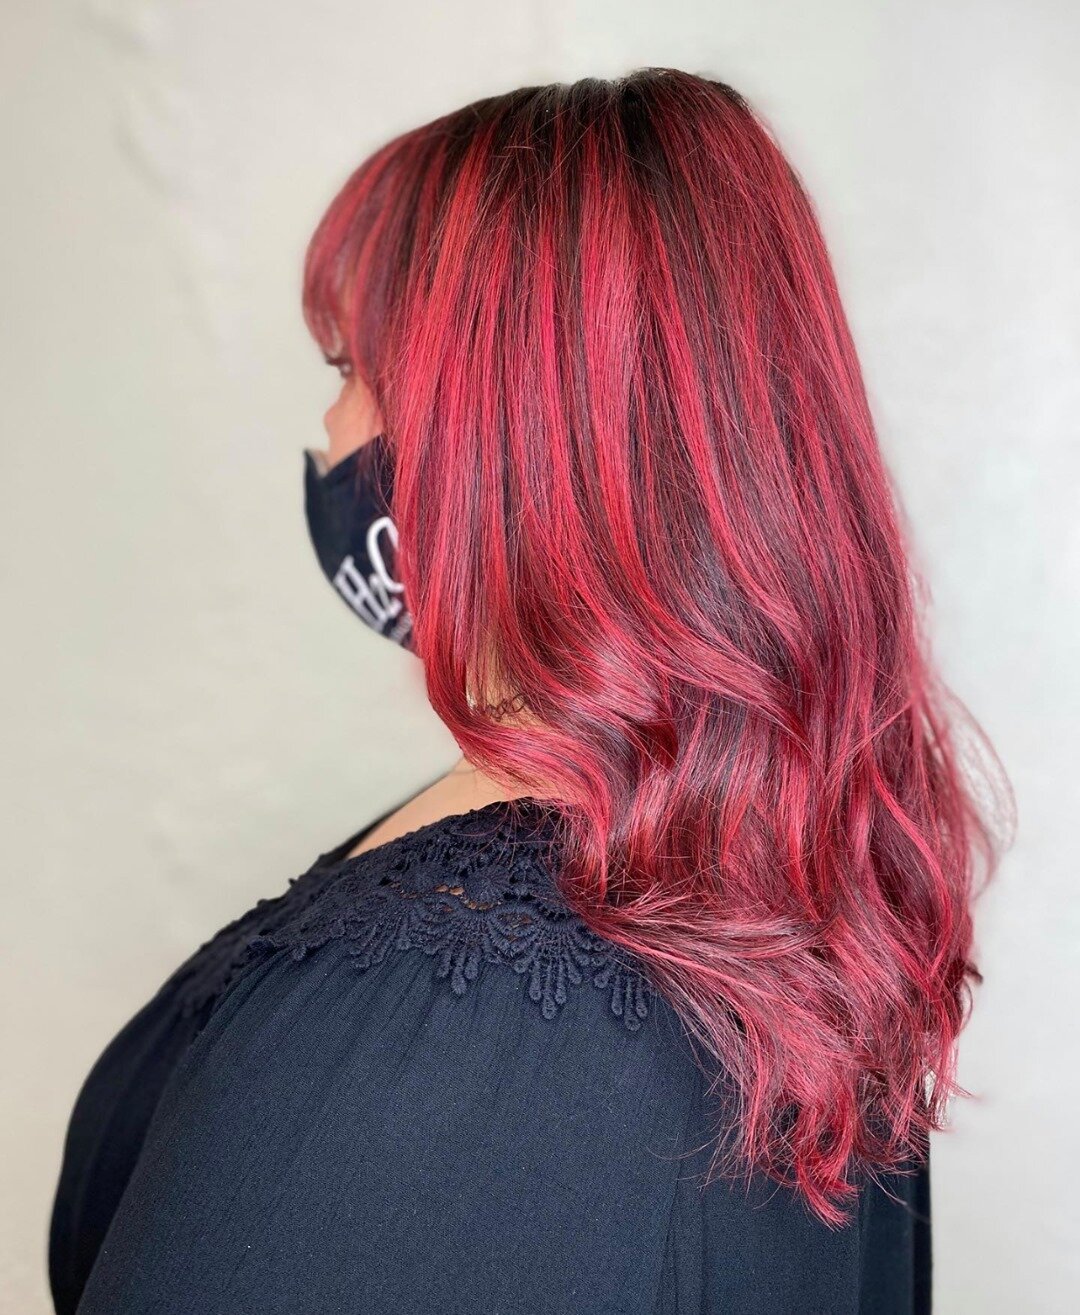 Happy Artist Wednesday ✨
Head to our story to meet more artists! 
VaultBeauty artist: @hair.hips.hell 
.
.
.
.
.
.
.
.
#vaultartist #vaultbeauty #vaultverified #hair #hairart #hairartist #haircolor #haircolorist #hairgoals #hairinspo #hairofinstagram